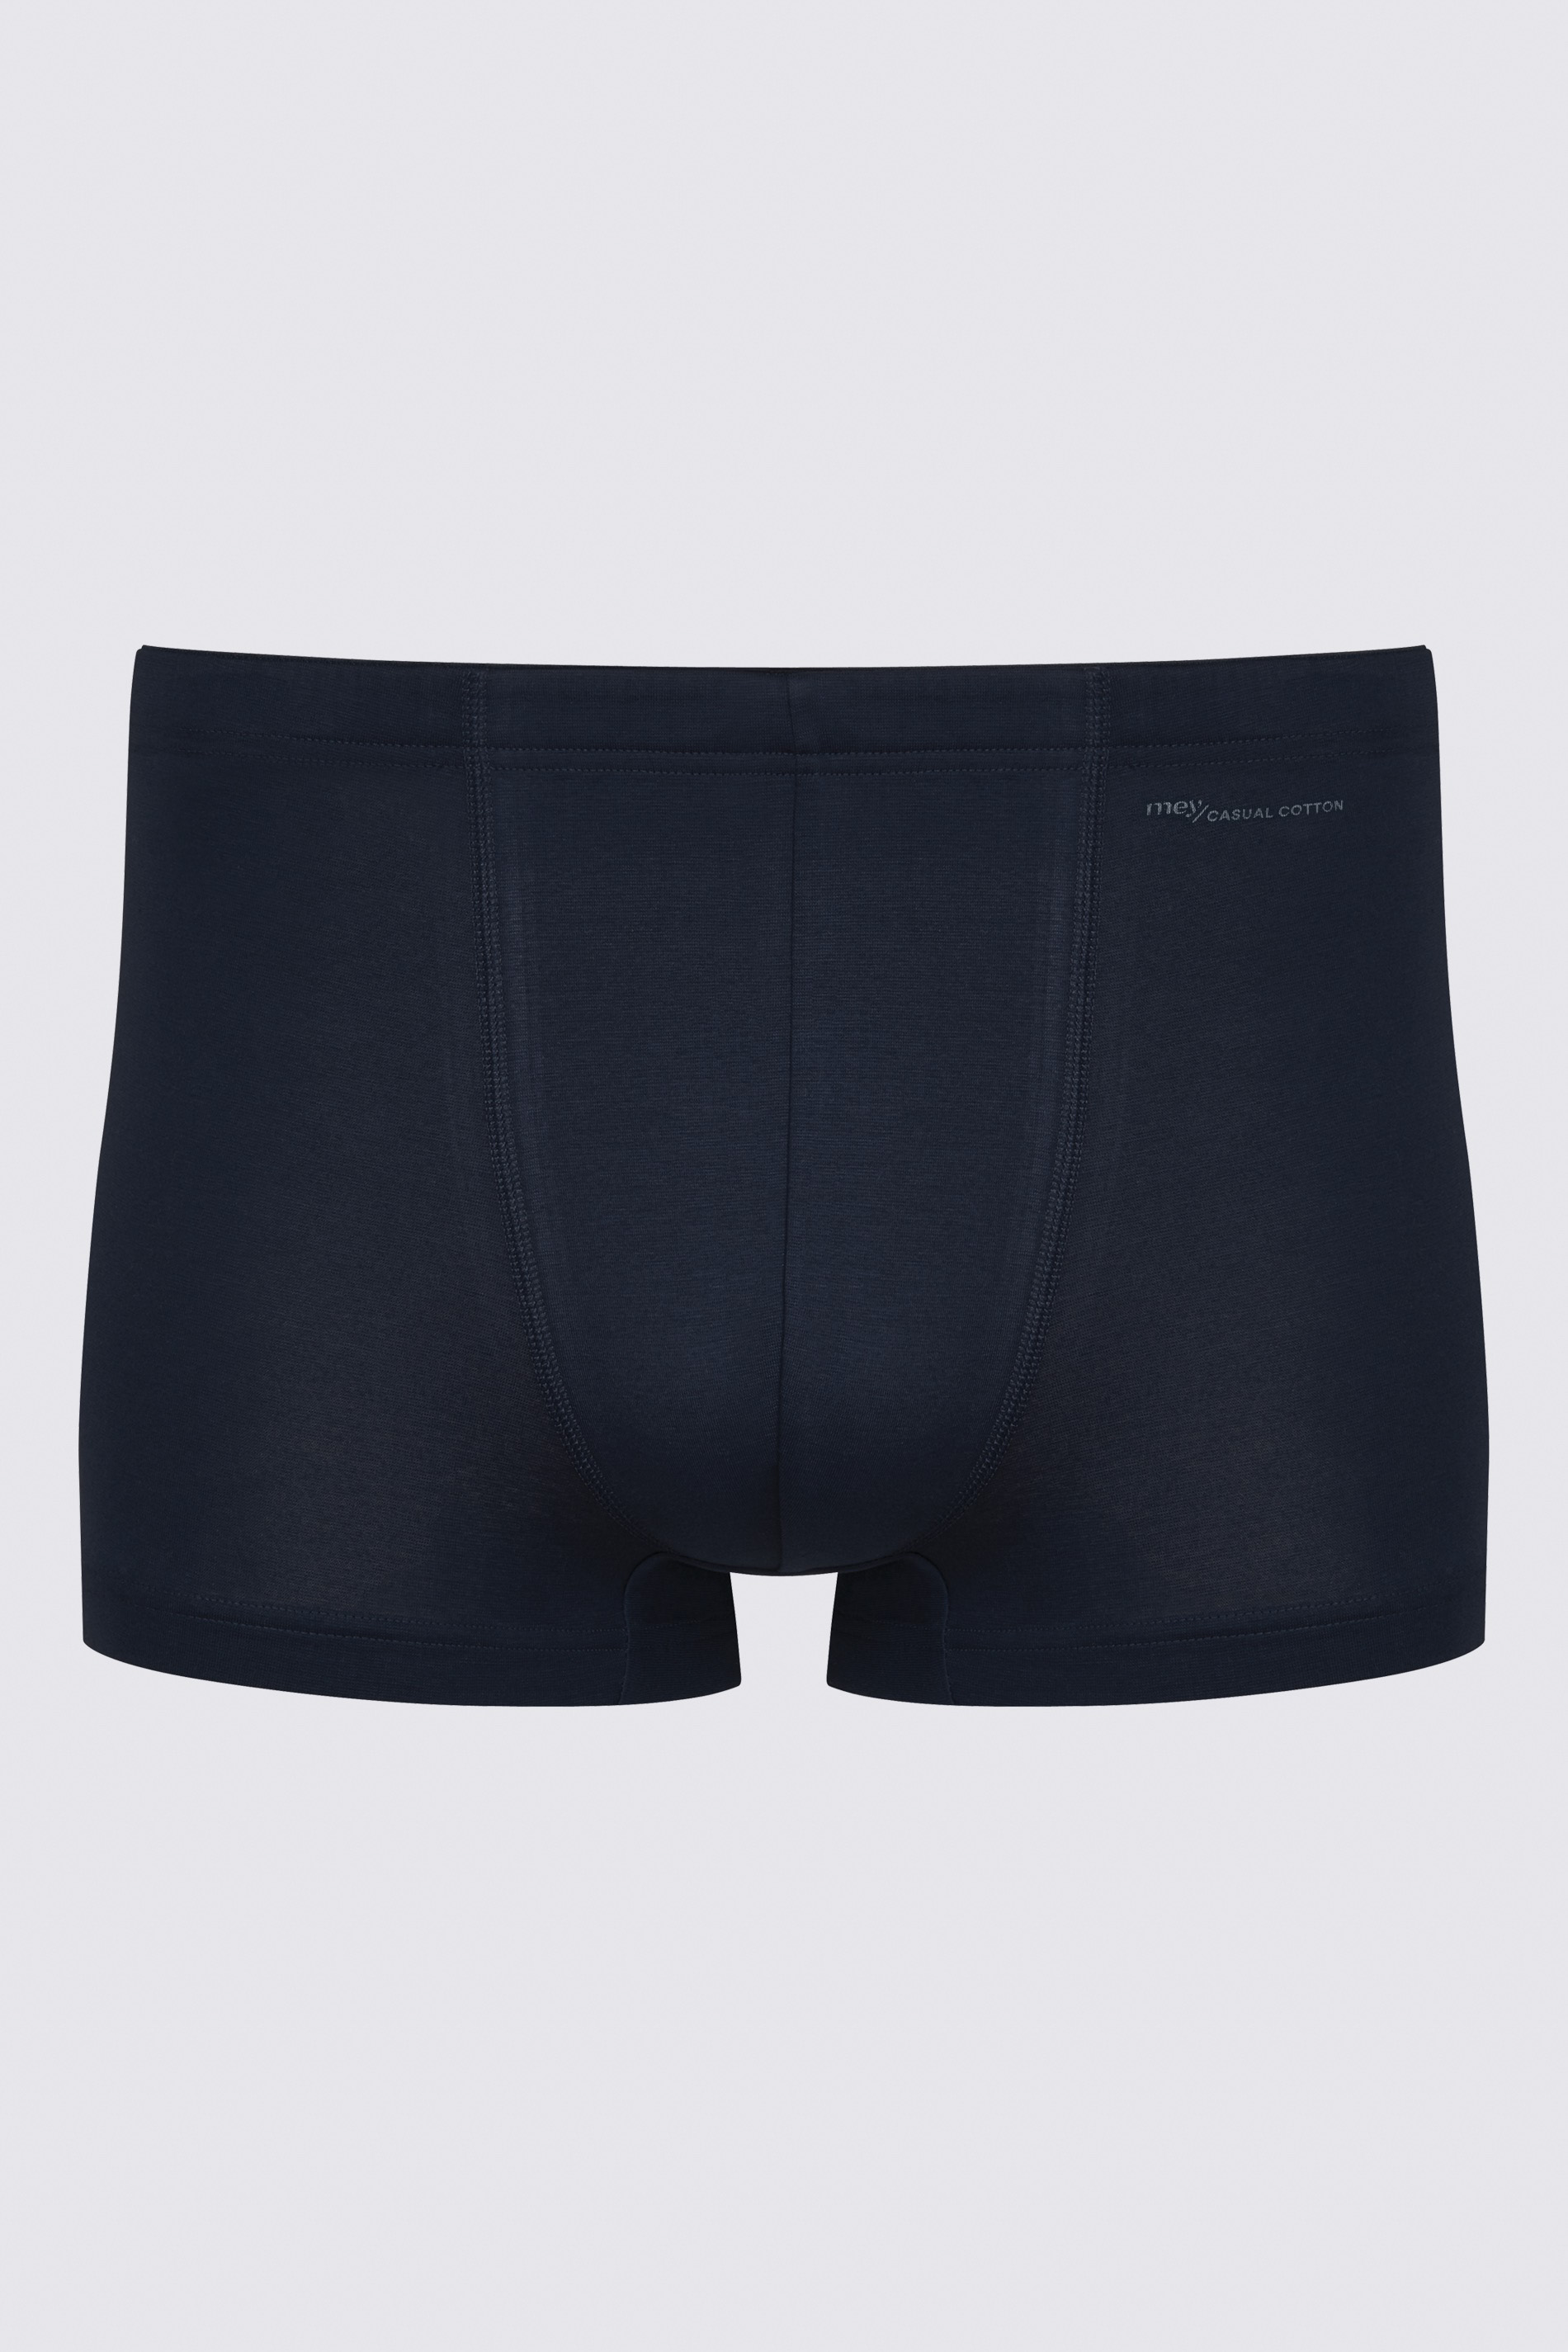 Herenshorty Yacht Blue Serie Casual Cotton Uitknippen | mey®